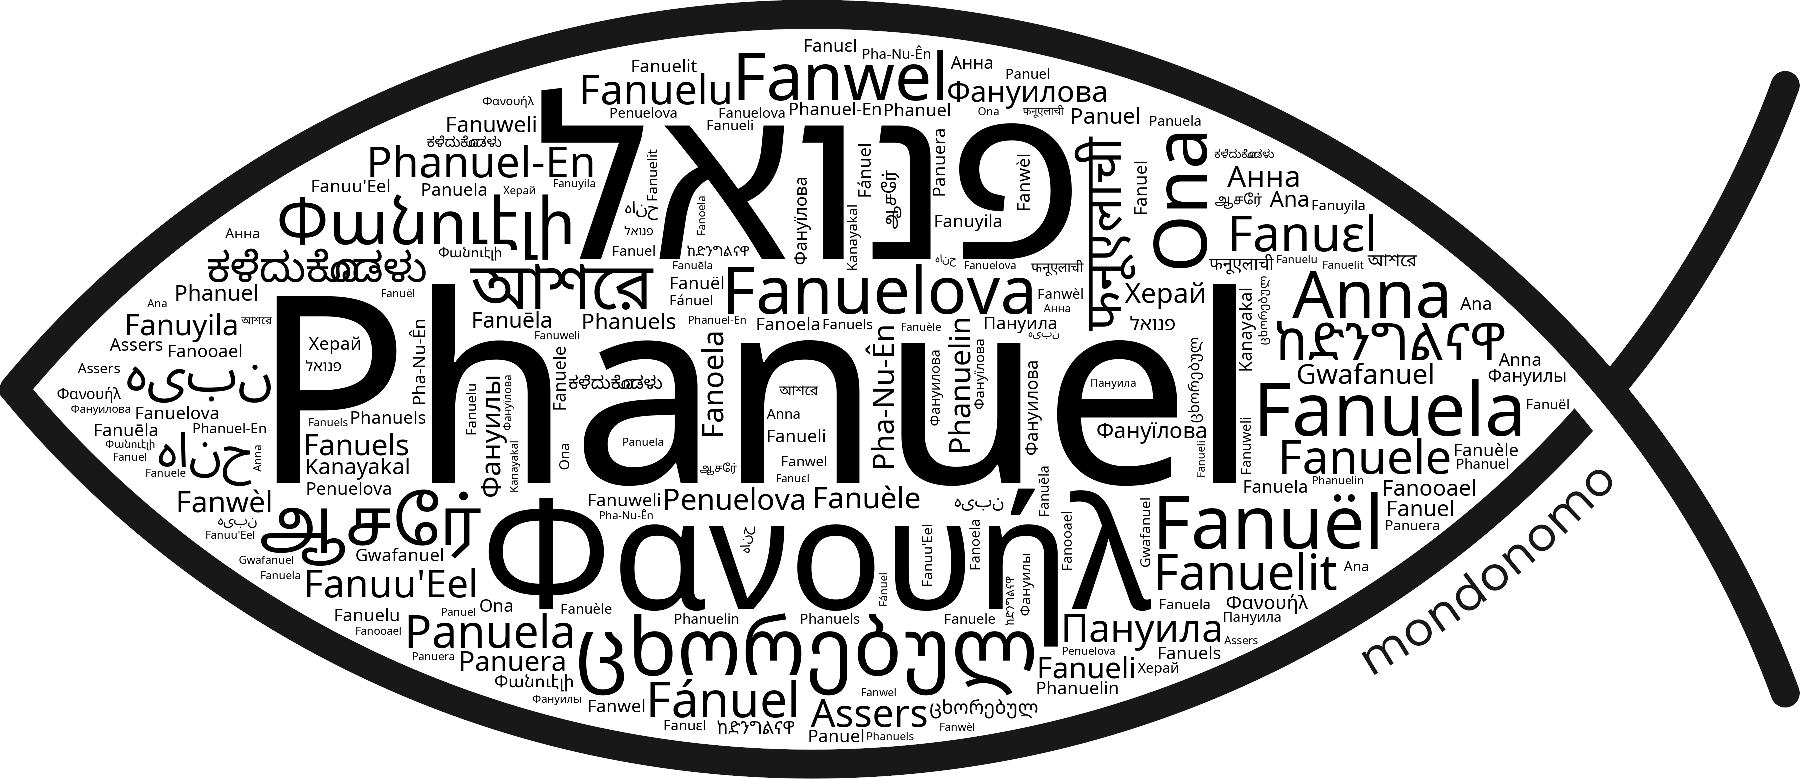 Name Phanuel in the world's Bibles